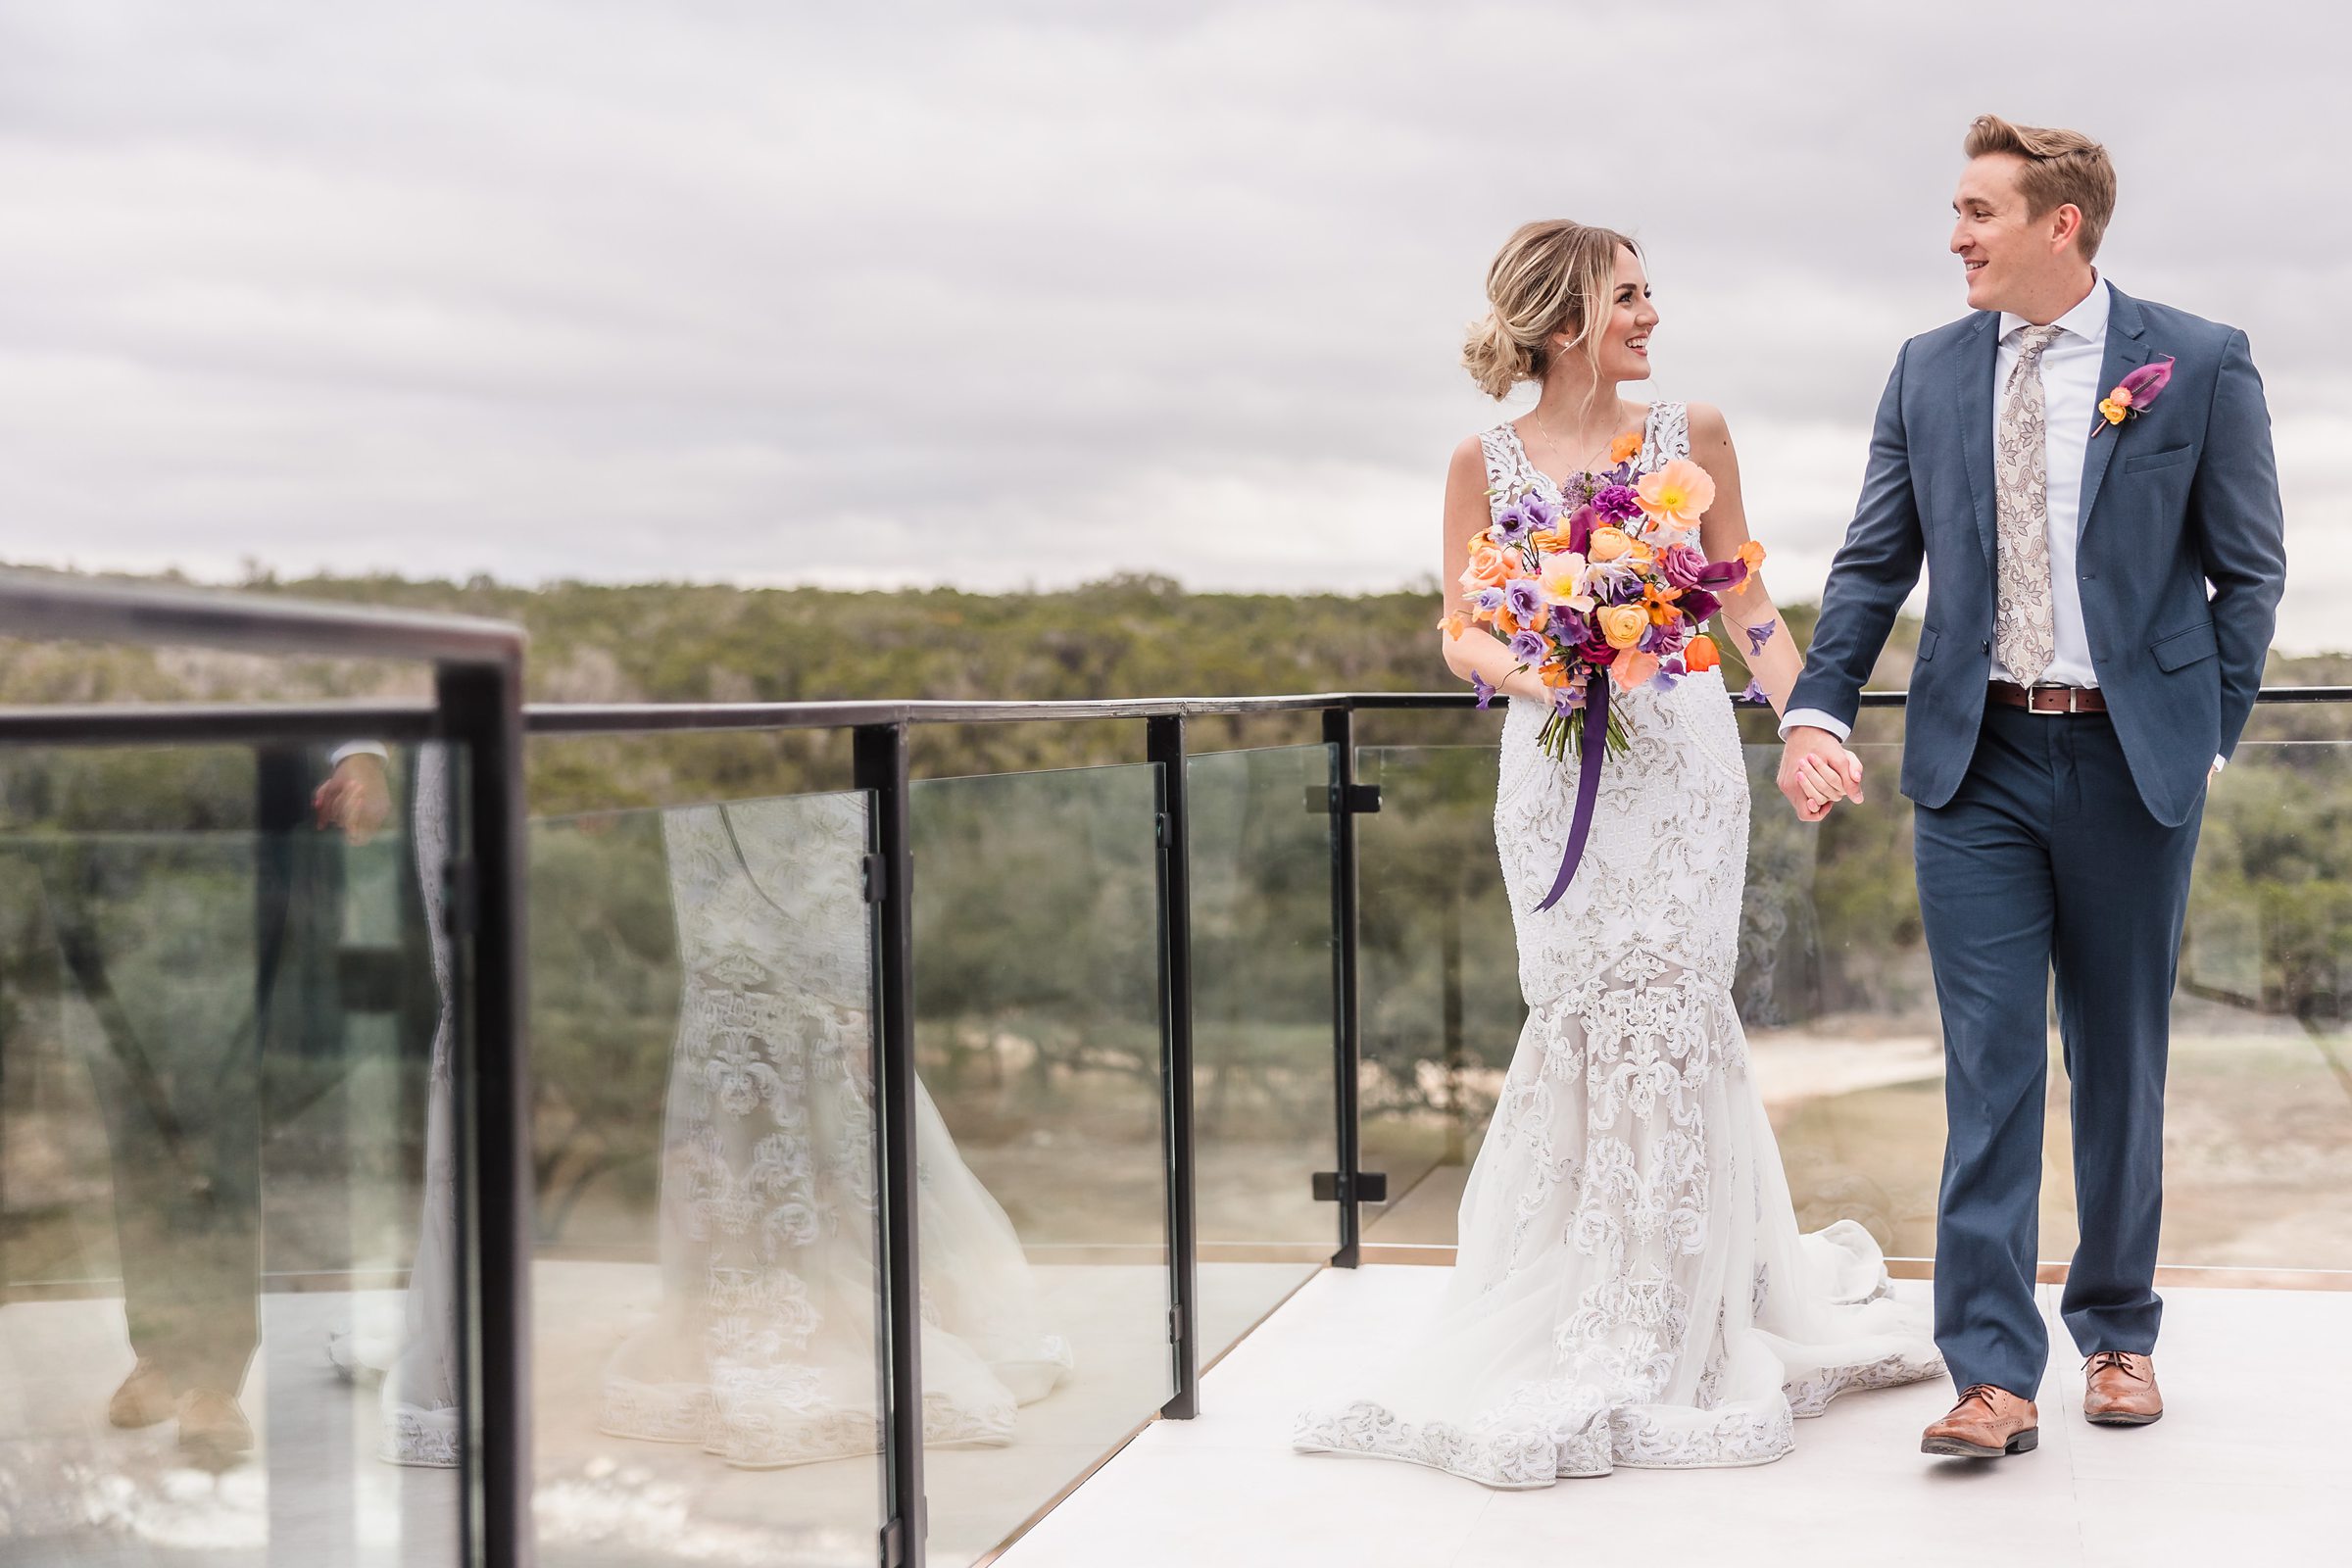 Bride and Groom celebrate their wedding at the Videre Estate venue in Wimberley, Texas.